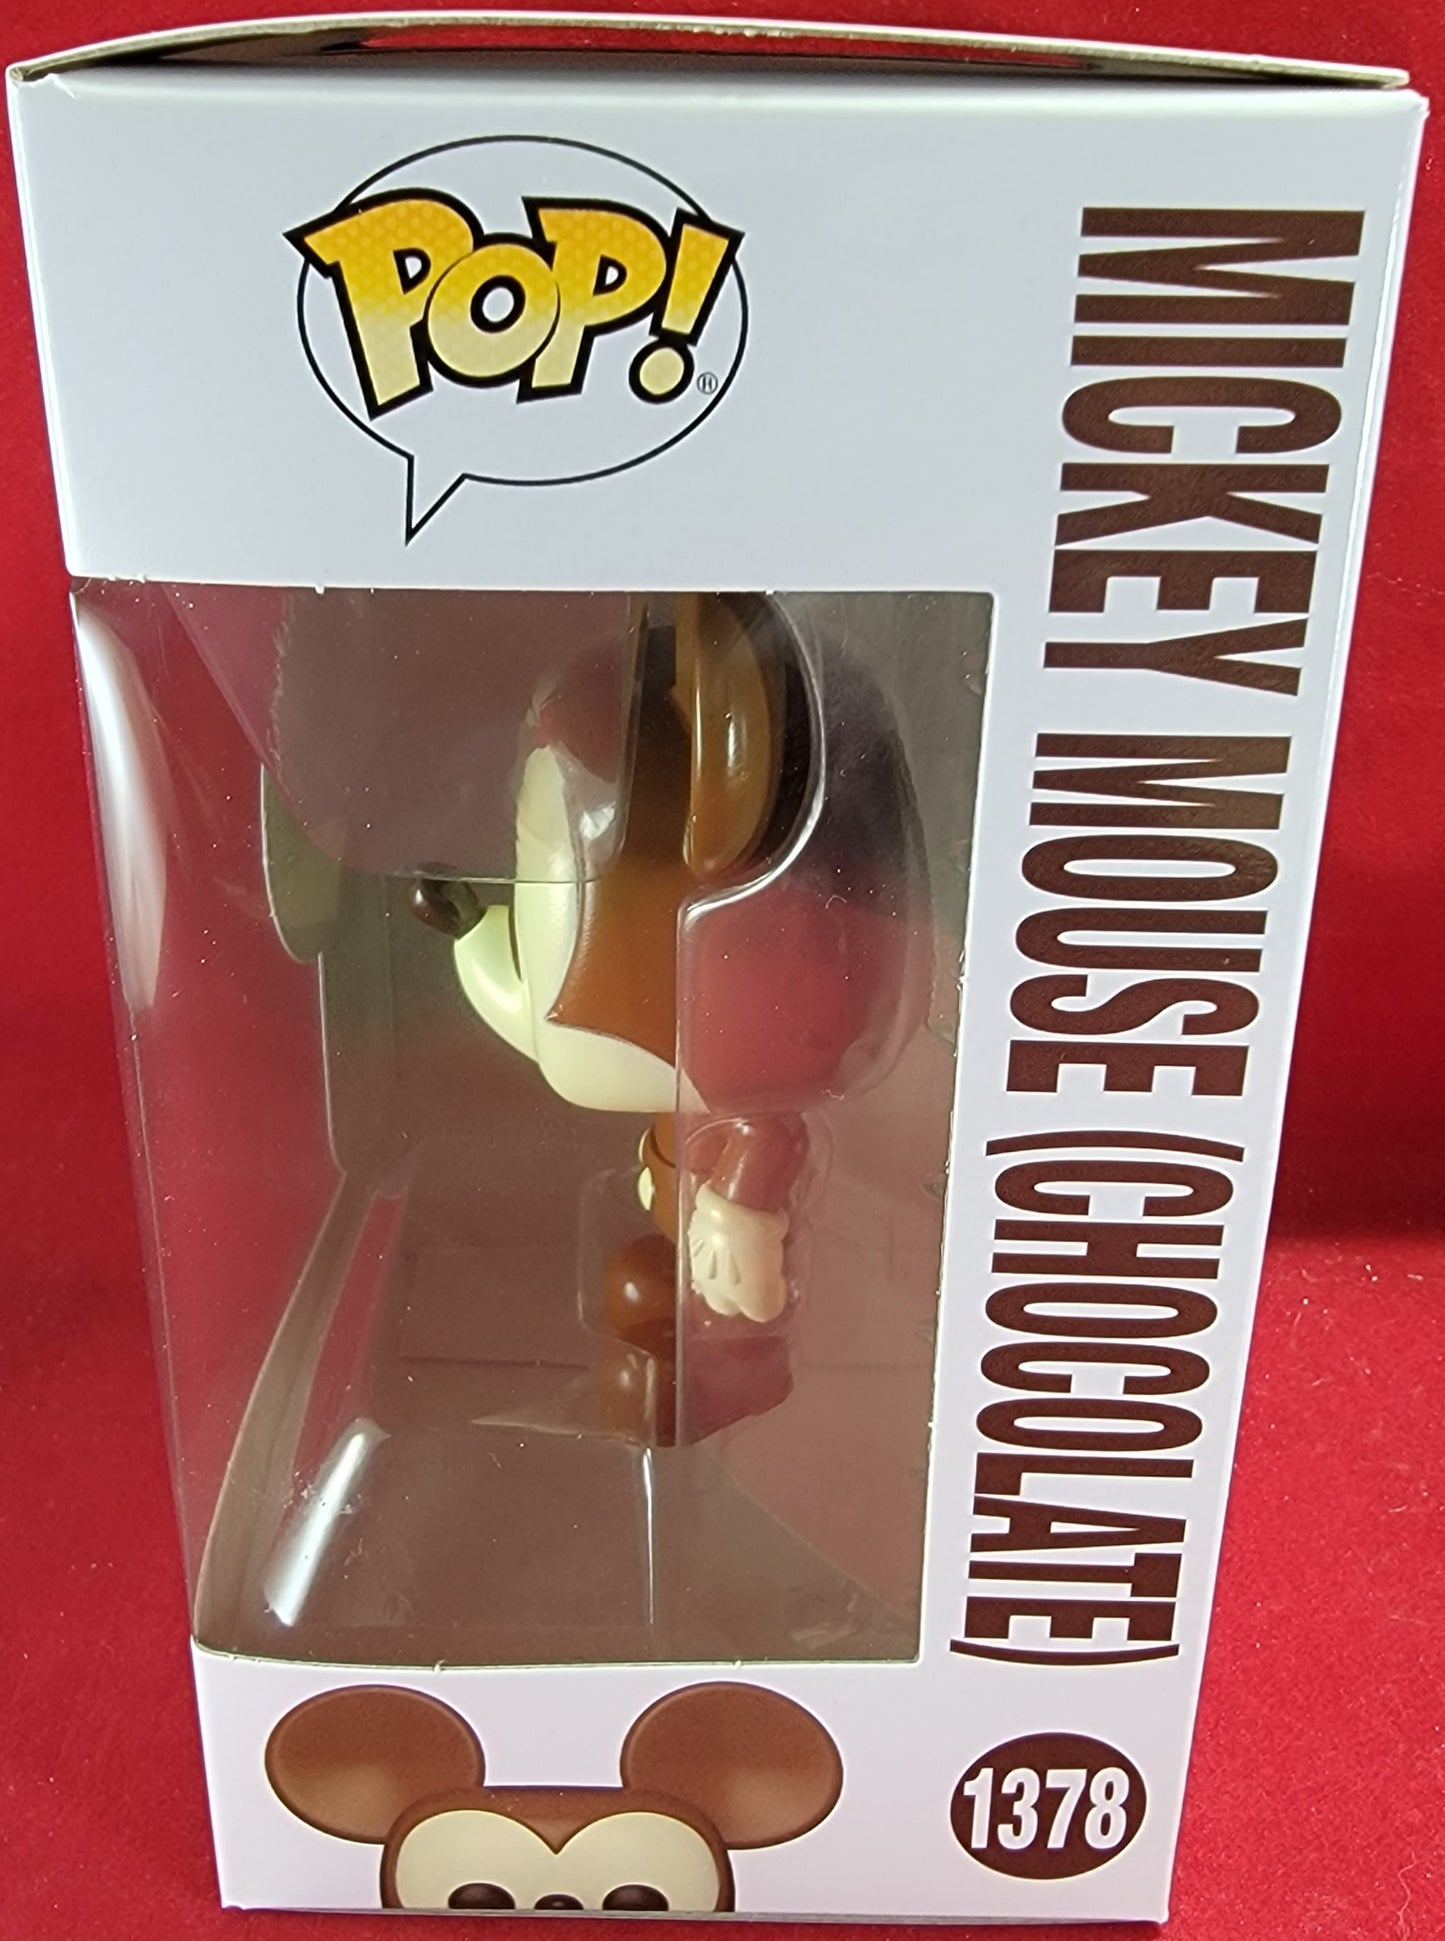 Mickey mouse chocolate funko # 1378 (nib) with pop protector